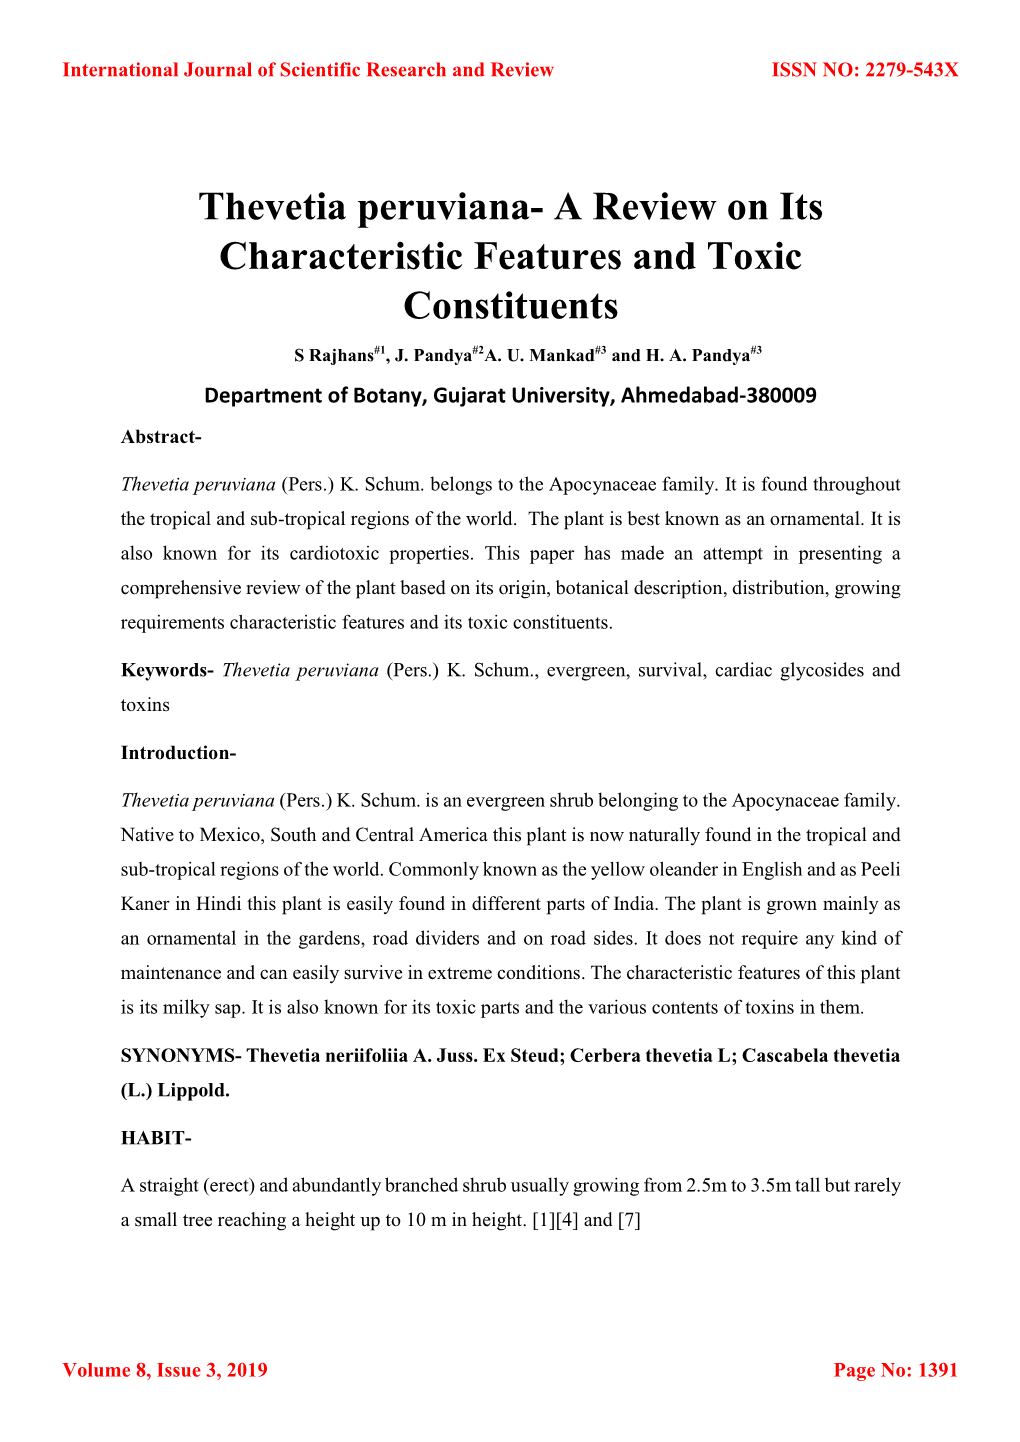 Thevetia Peruviana- a Review on Its Characteristic Features and Toxic Constituents S Rajhans#1, J